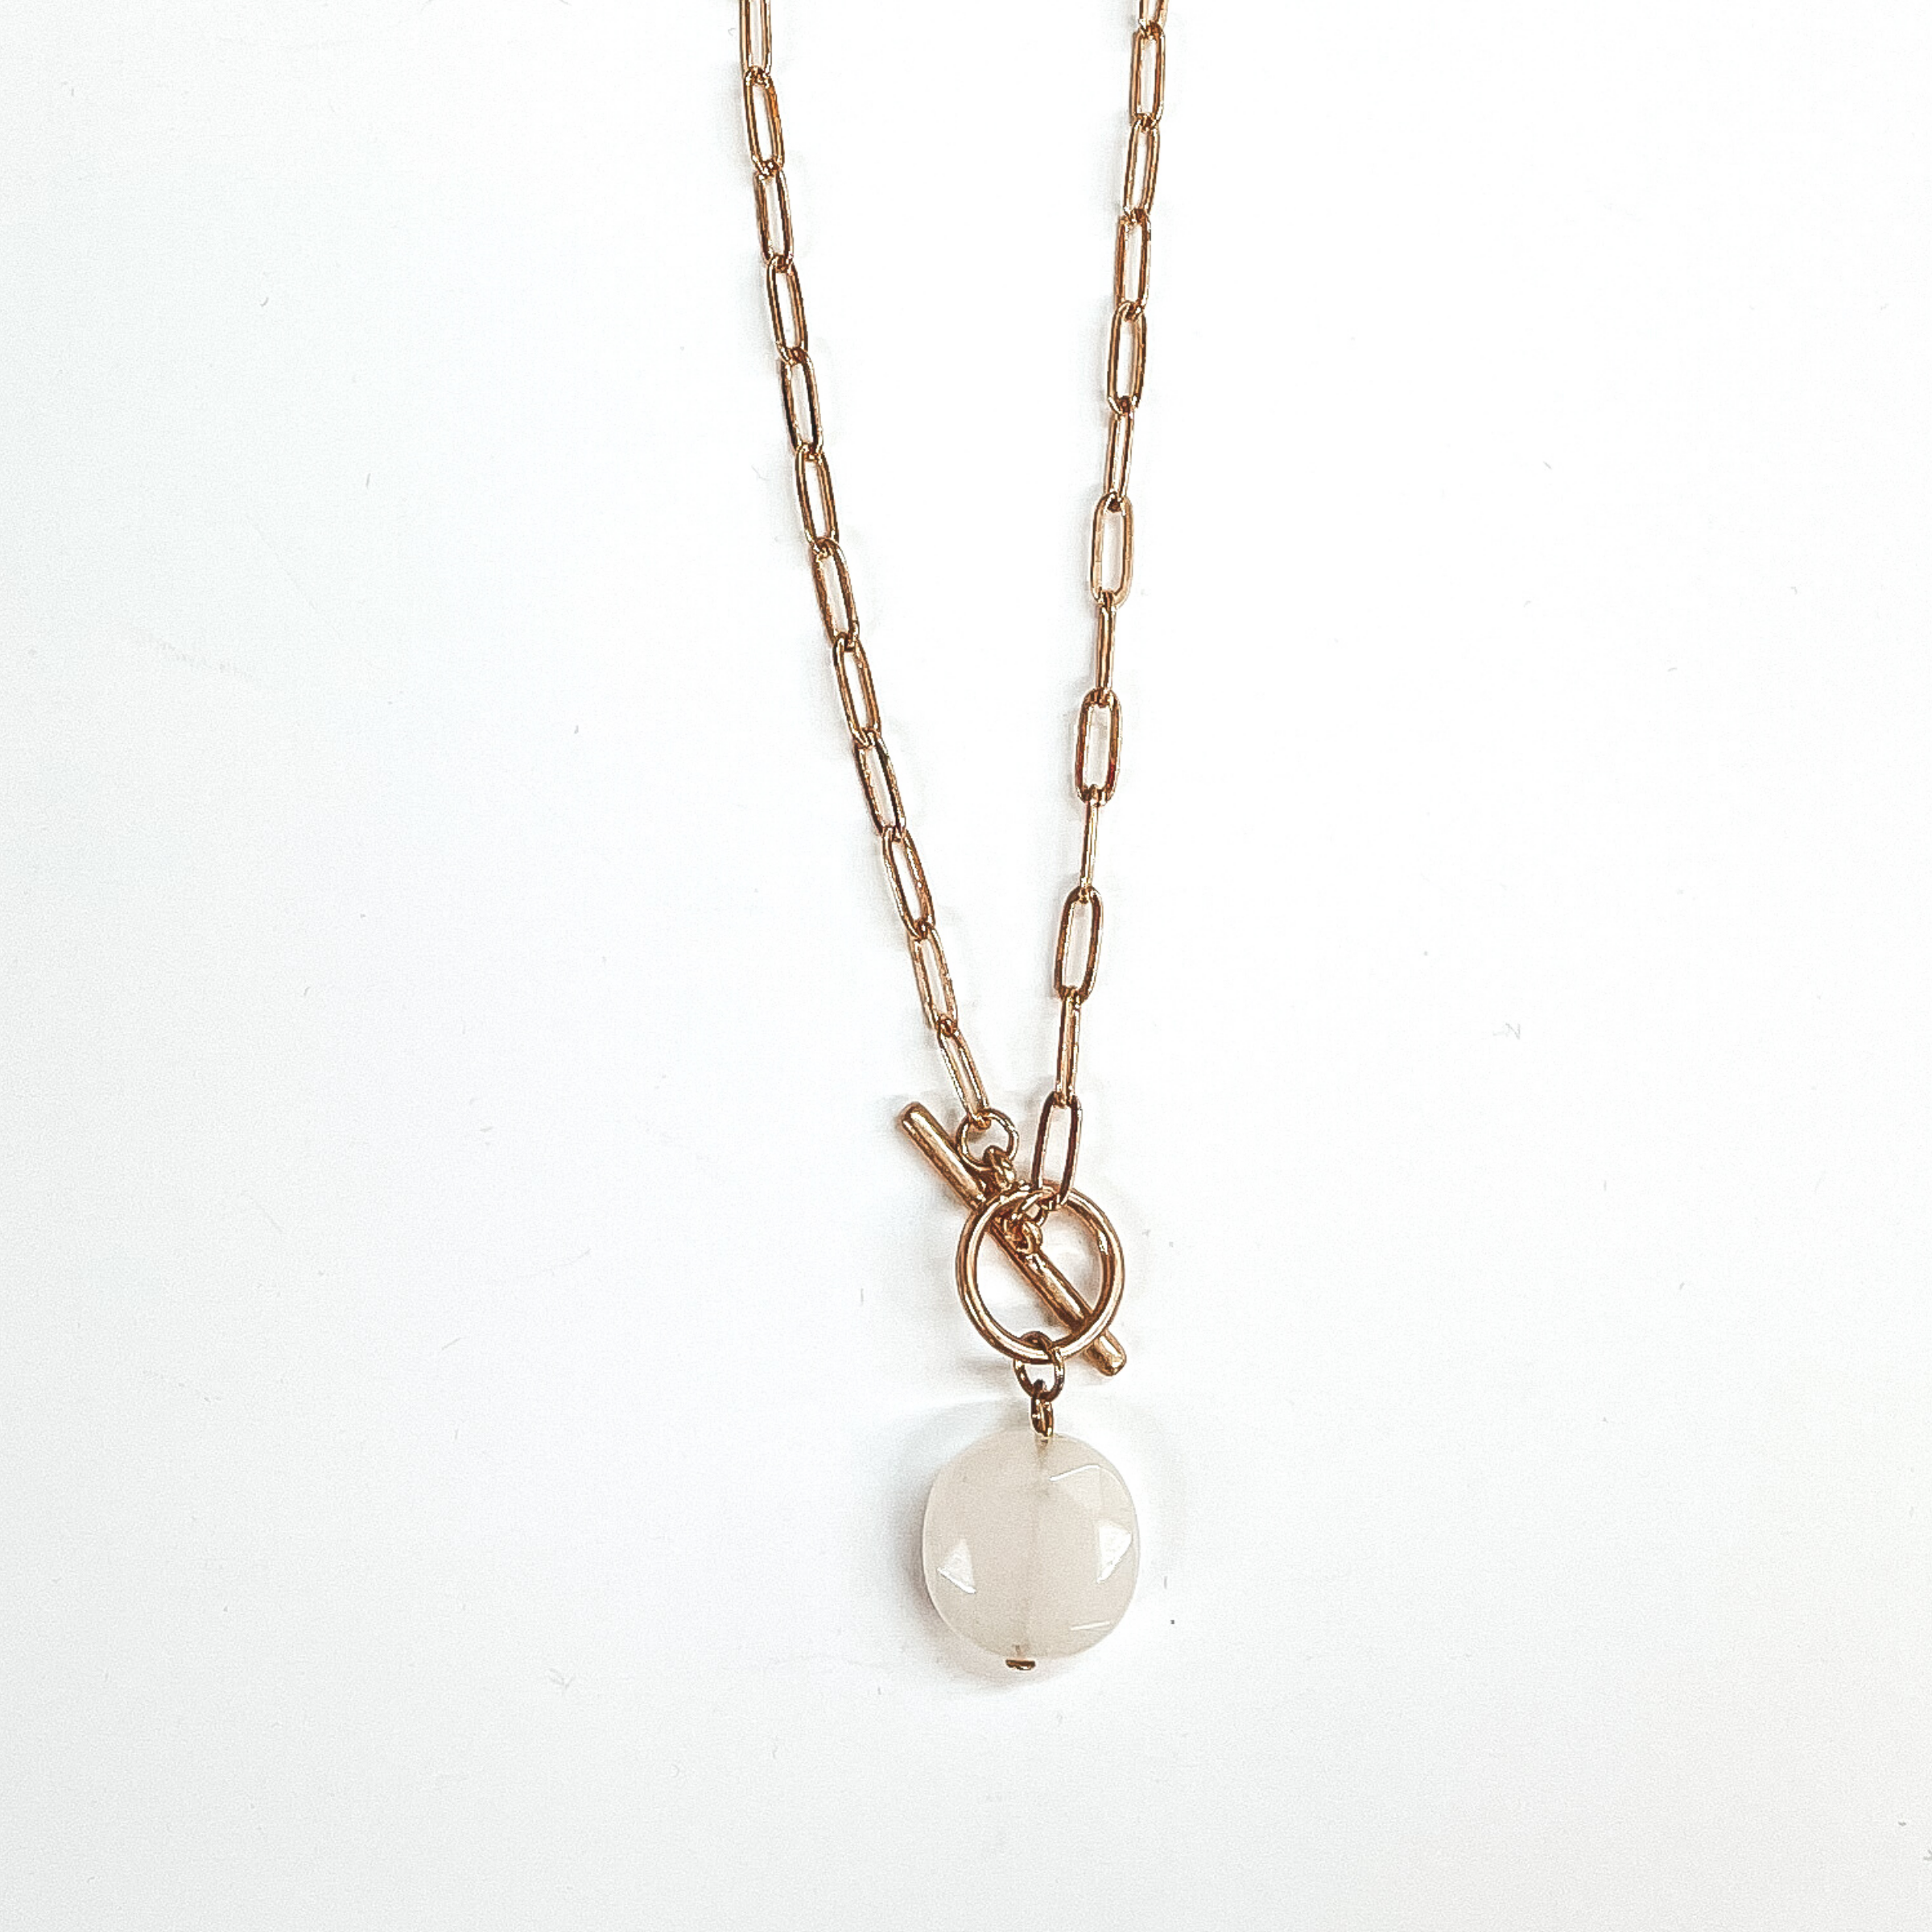 Gold paperclip chain necklace with toggle clasp and  natural stone circle pendant in ivory. Taken on  a white background.